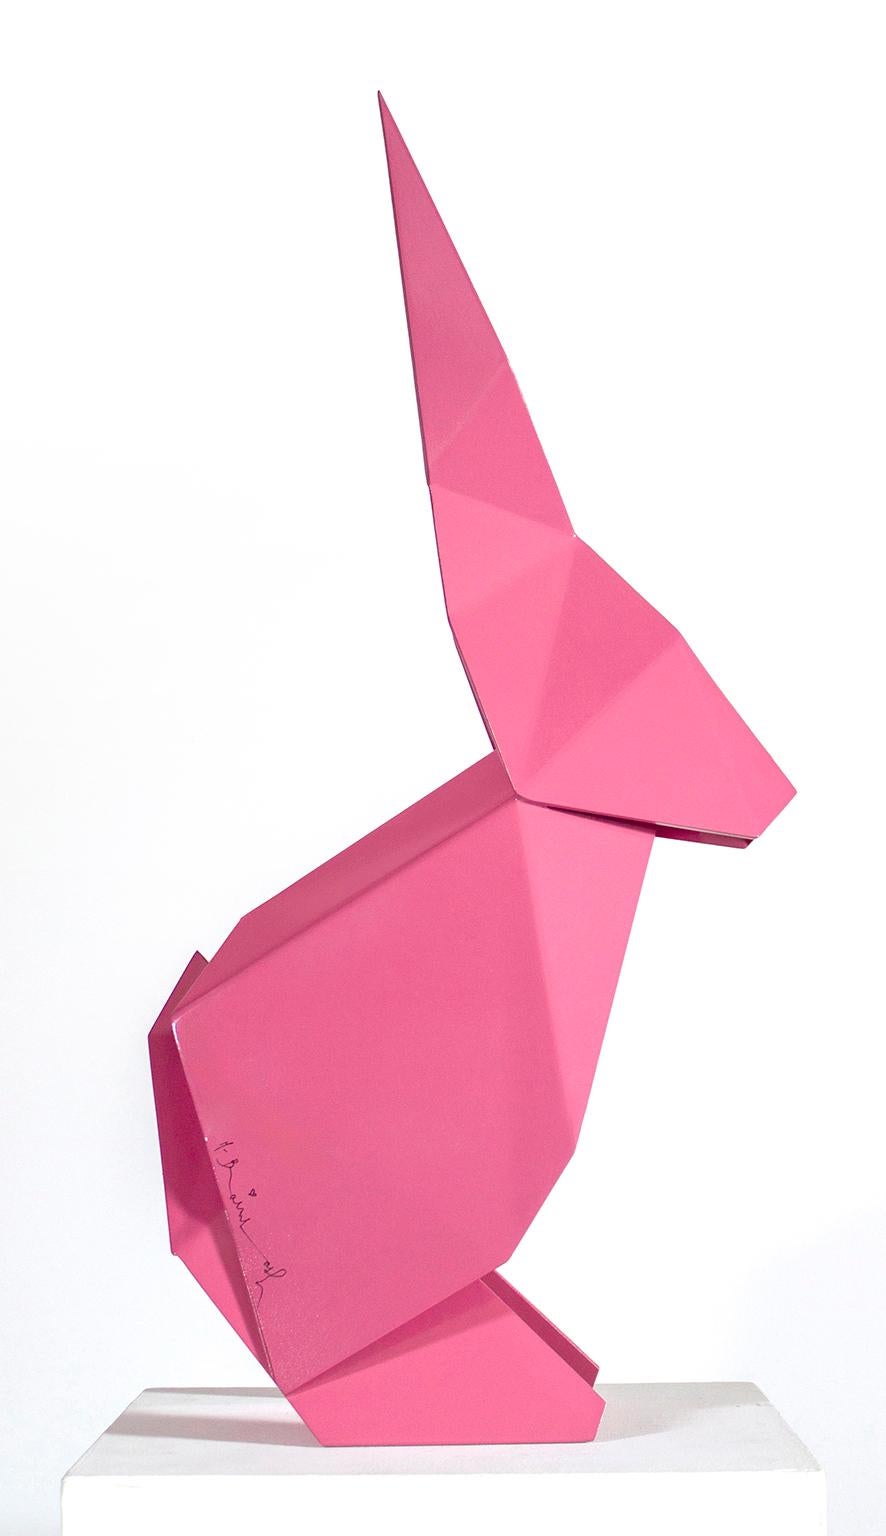 32" high, origami-style "Imagiro Bunny, Pink" small painted stainless steel sculpture by artist Mr. Brainwash. Signed Mr. Brainwash on left side. Edition 2 of 8. 